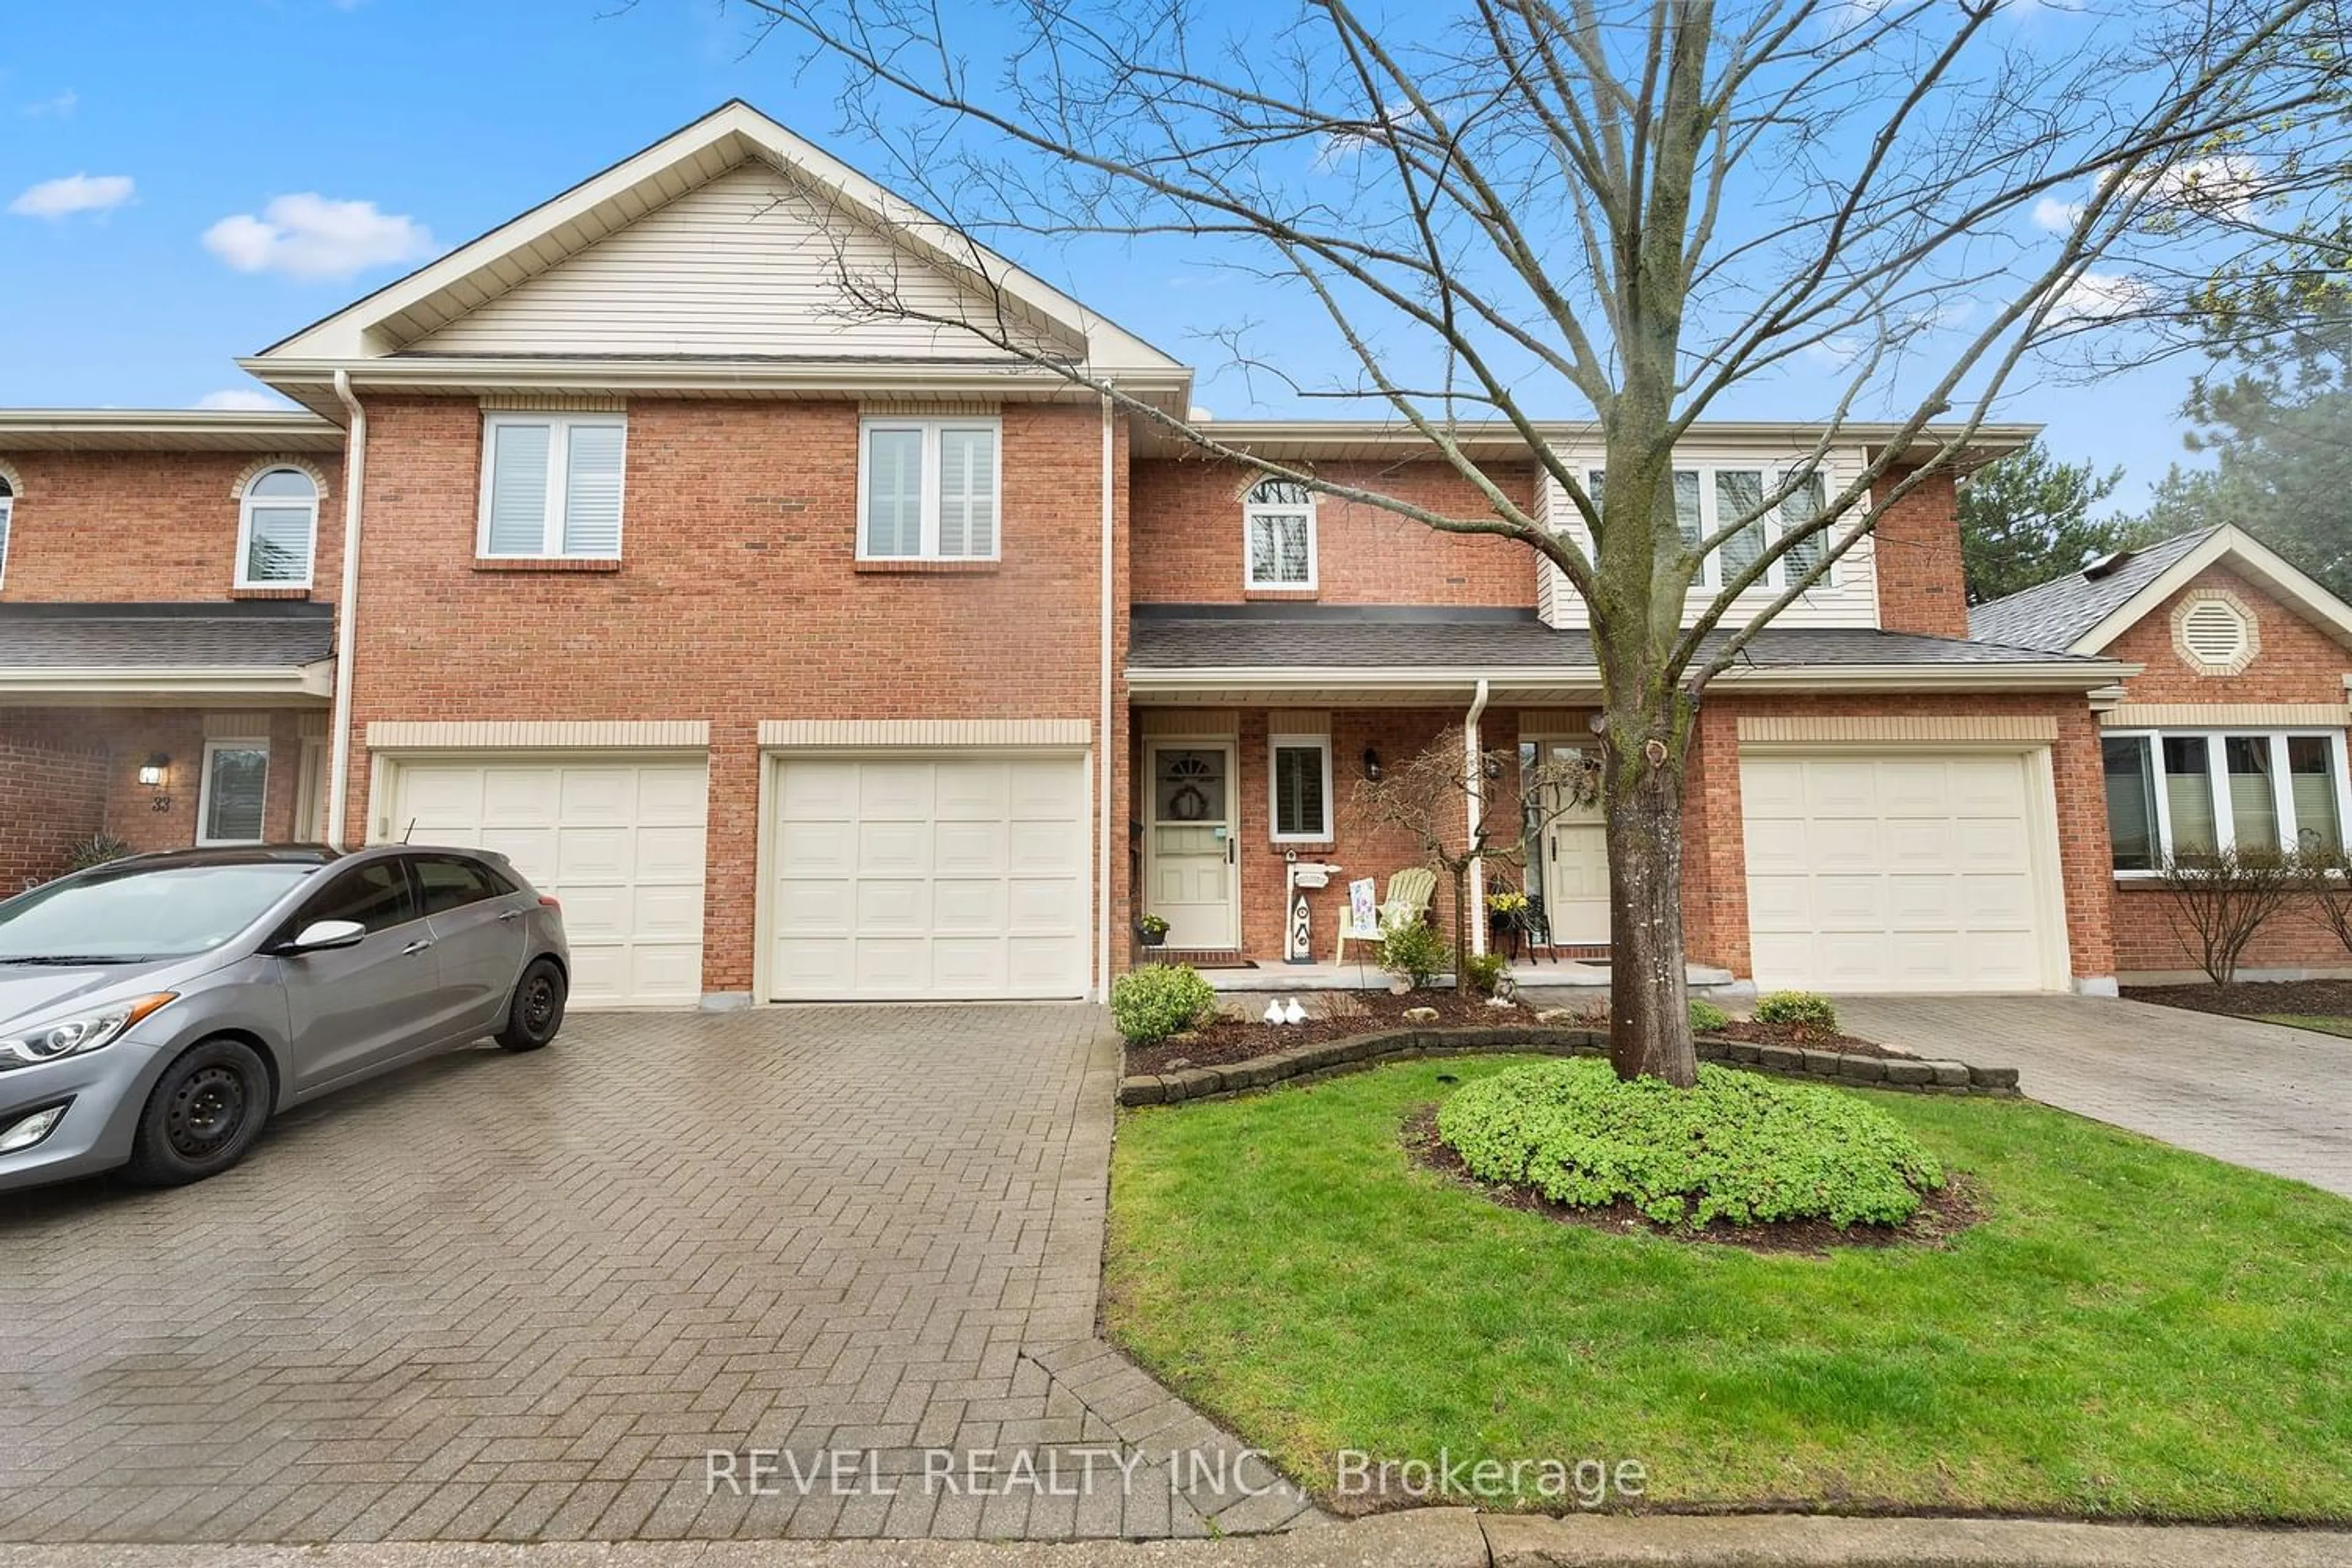 Home with brick exterior material for 67 Linwell Rd #32, St. Catharines Ontario L2N 7N3